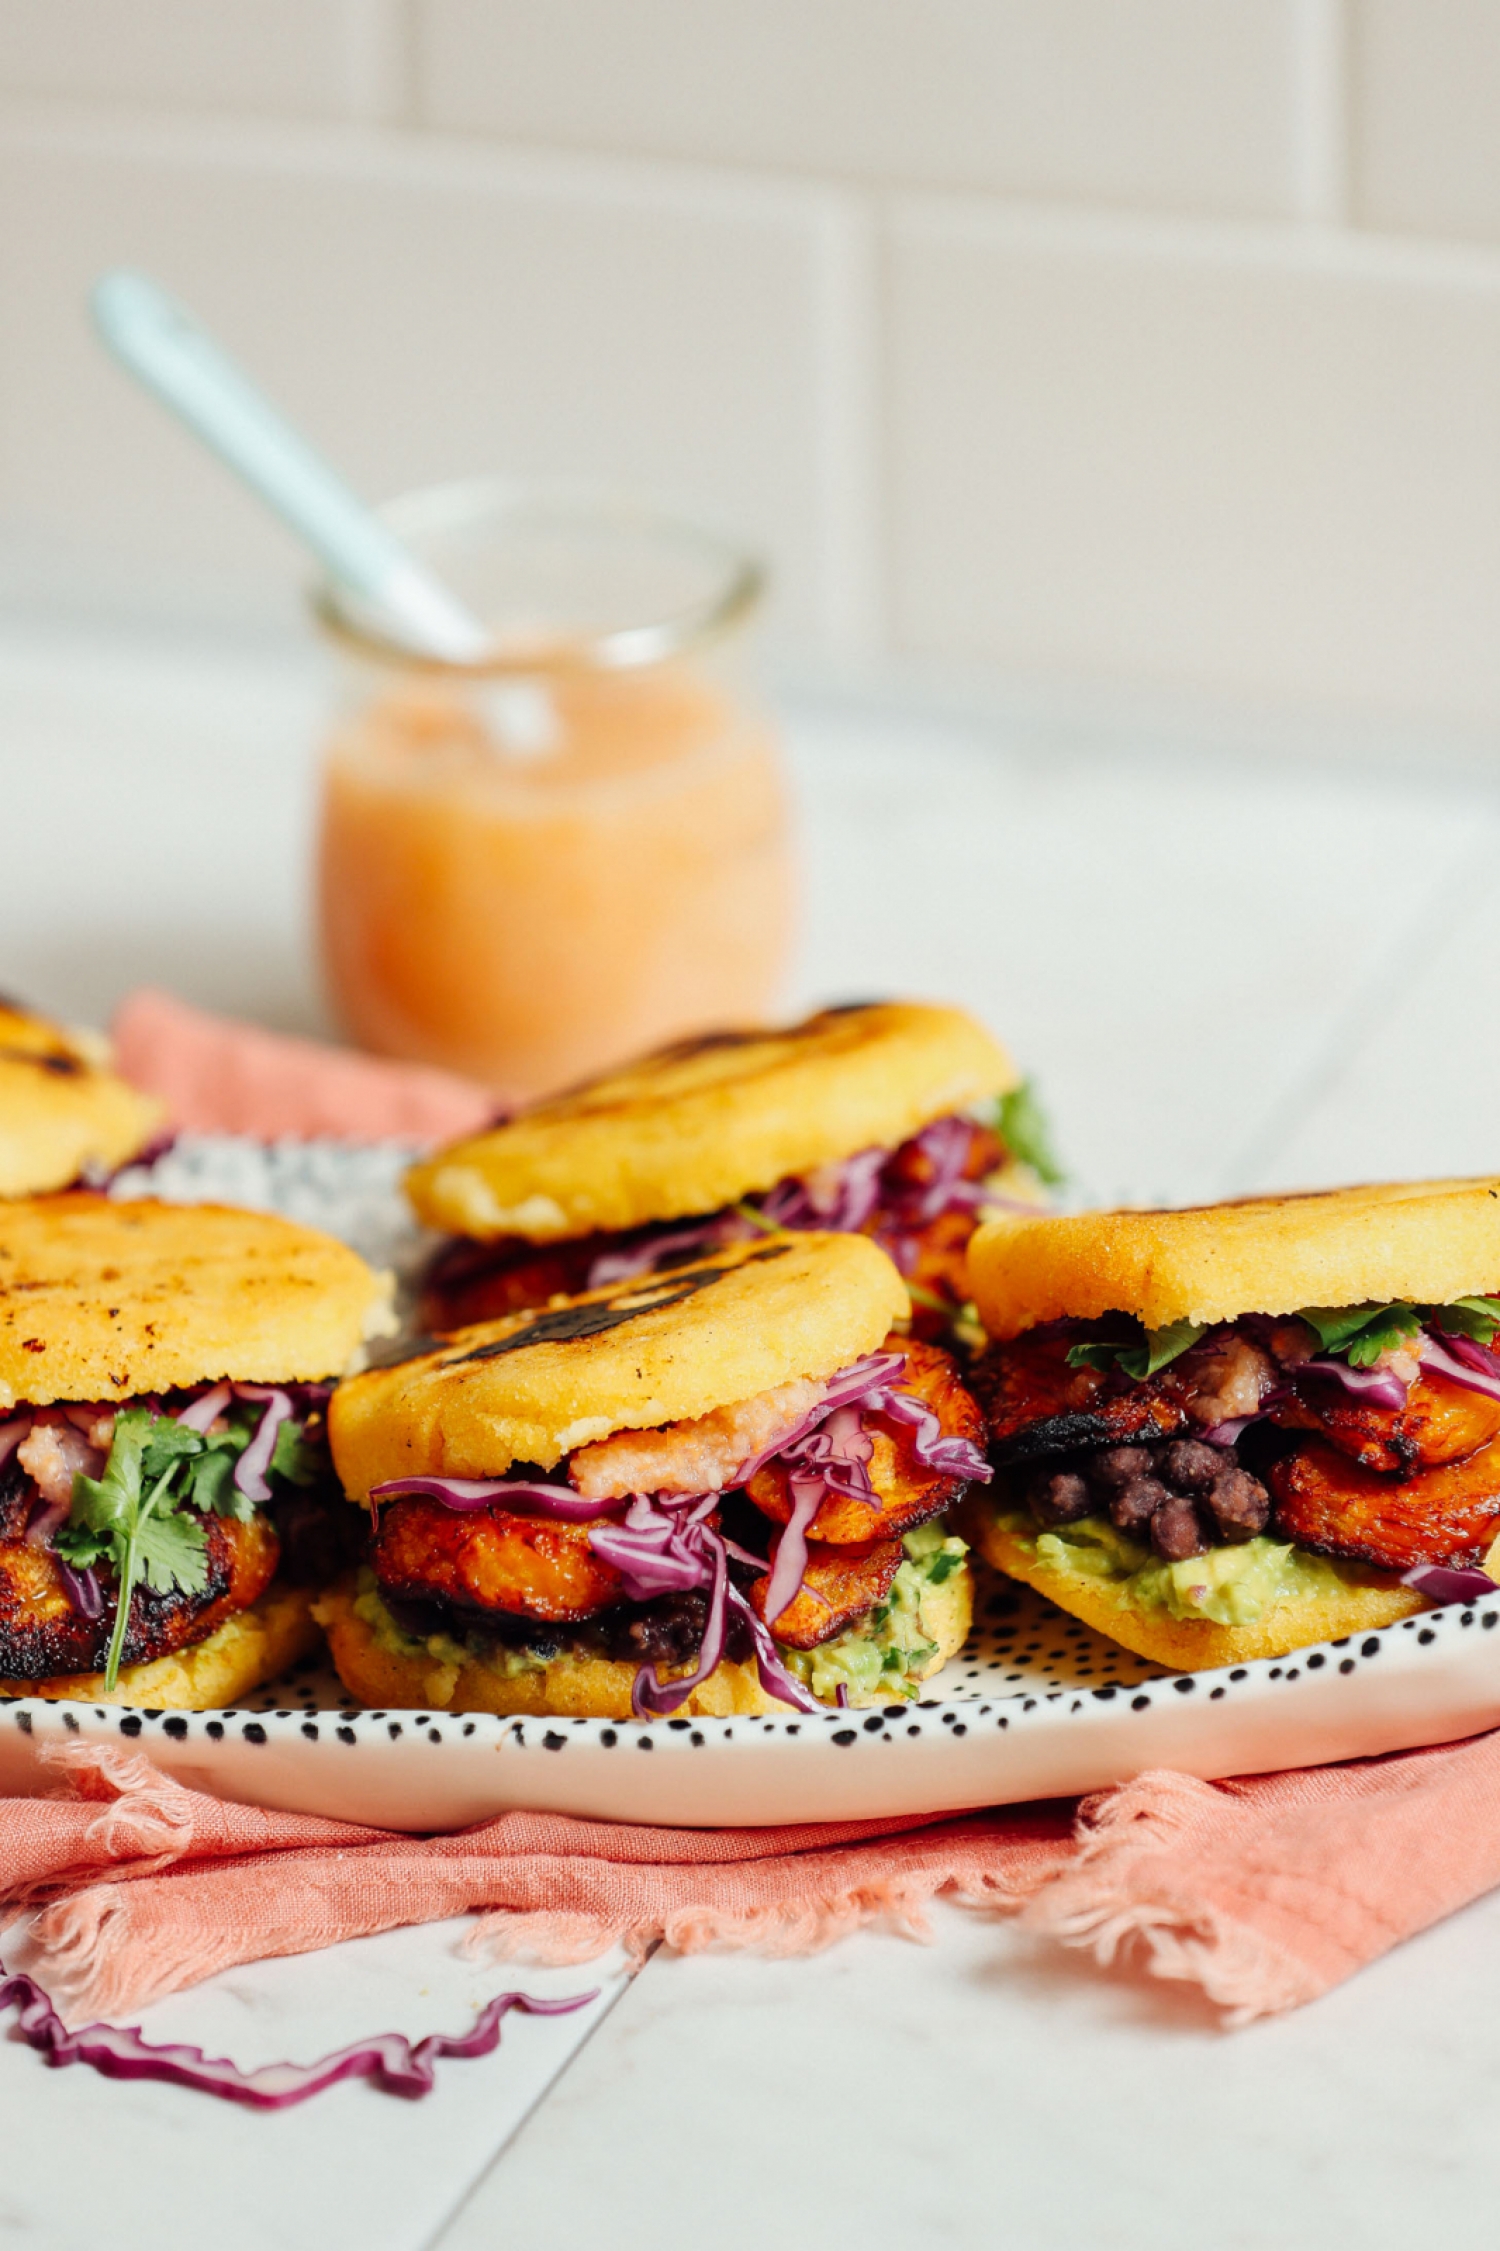 <p>If you've been dreaming of taking that South American vacation, up your motivation with these mouthwatering black bean and plantain arepa sandwiches. With prepared arepas, they can be whipped up in just 30 minutes, though they'll be gobbled up in a fraction of that time. <a href="https://minimalistbaker.com/black-bean-plantain-arepa-sandwiches/" rel="noopener">Get the recipe here.</a></p>